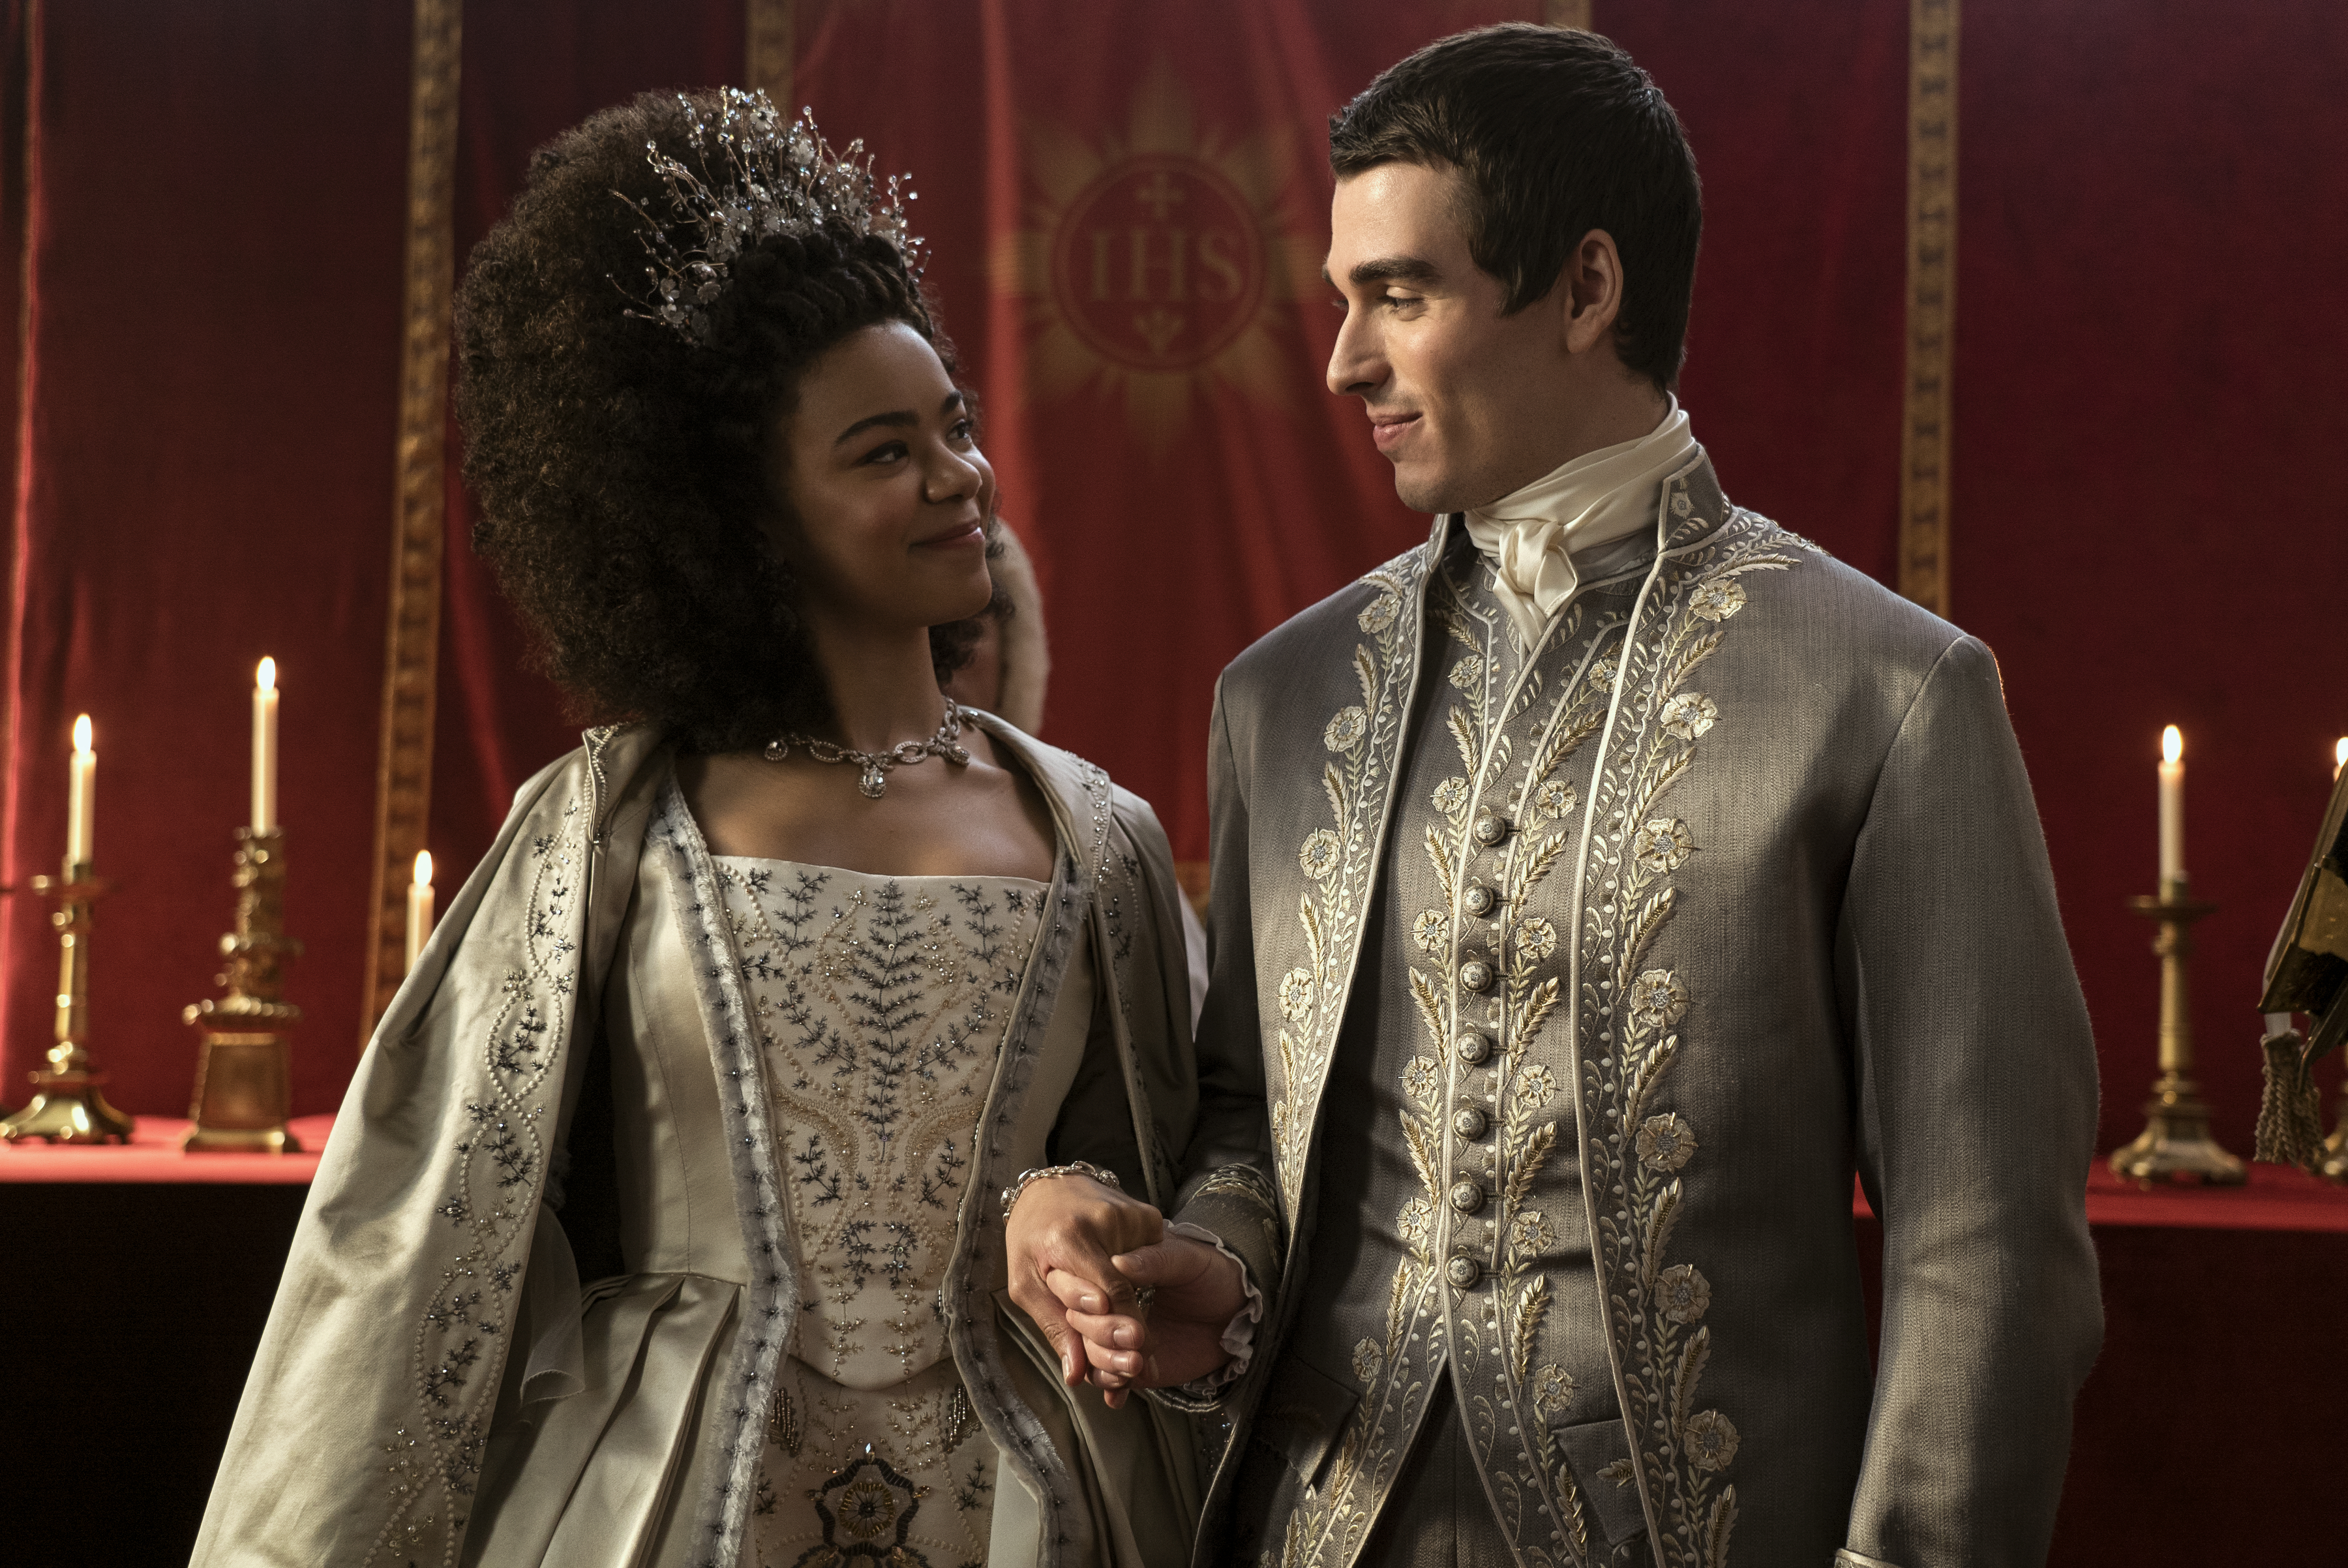 <p>"Queen Charlotte: A Bridgerton Story" was released on Netflix in 2023 as a companion series to "Bridgerton." The six-episode prequel spinoff tells the backstory of Queen Charlotte (played by India Amarteifio) and King George III (played by Corey Mylchreest), revealing how they came to be married and how they navigated heartbreaking challenges as young royals.</p><p>The gorgeous costume drama was a hit with critics and viewers alike and scored multiple Emmy nominations (winning for makeup and hairstyle design). It was so popular, it debuted at No. 1 on the streamer in 91 countries including the United States.</p>